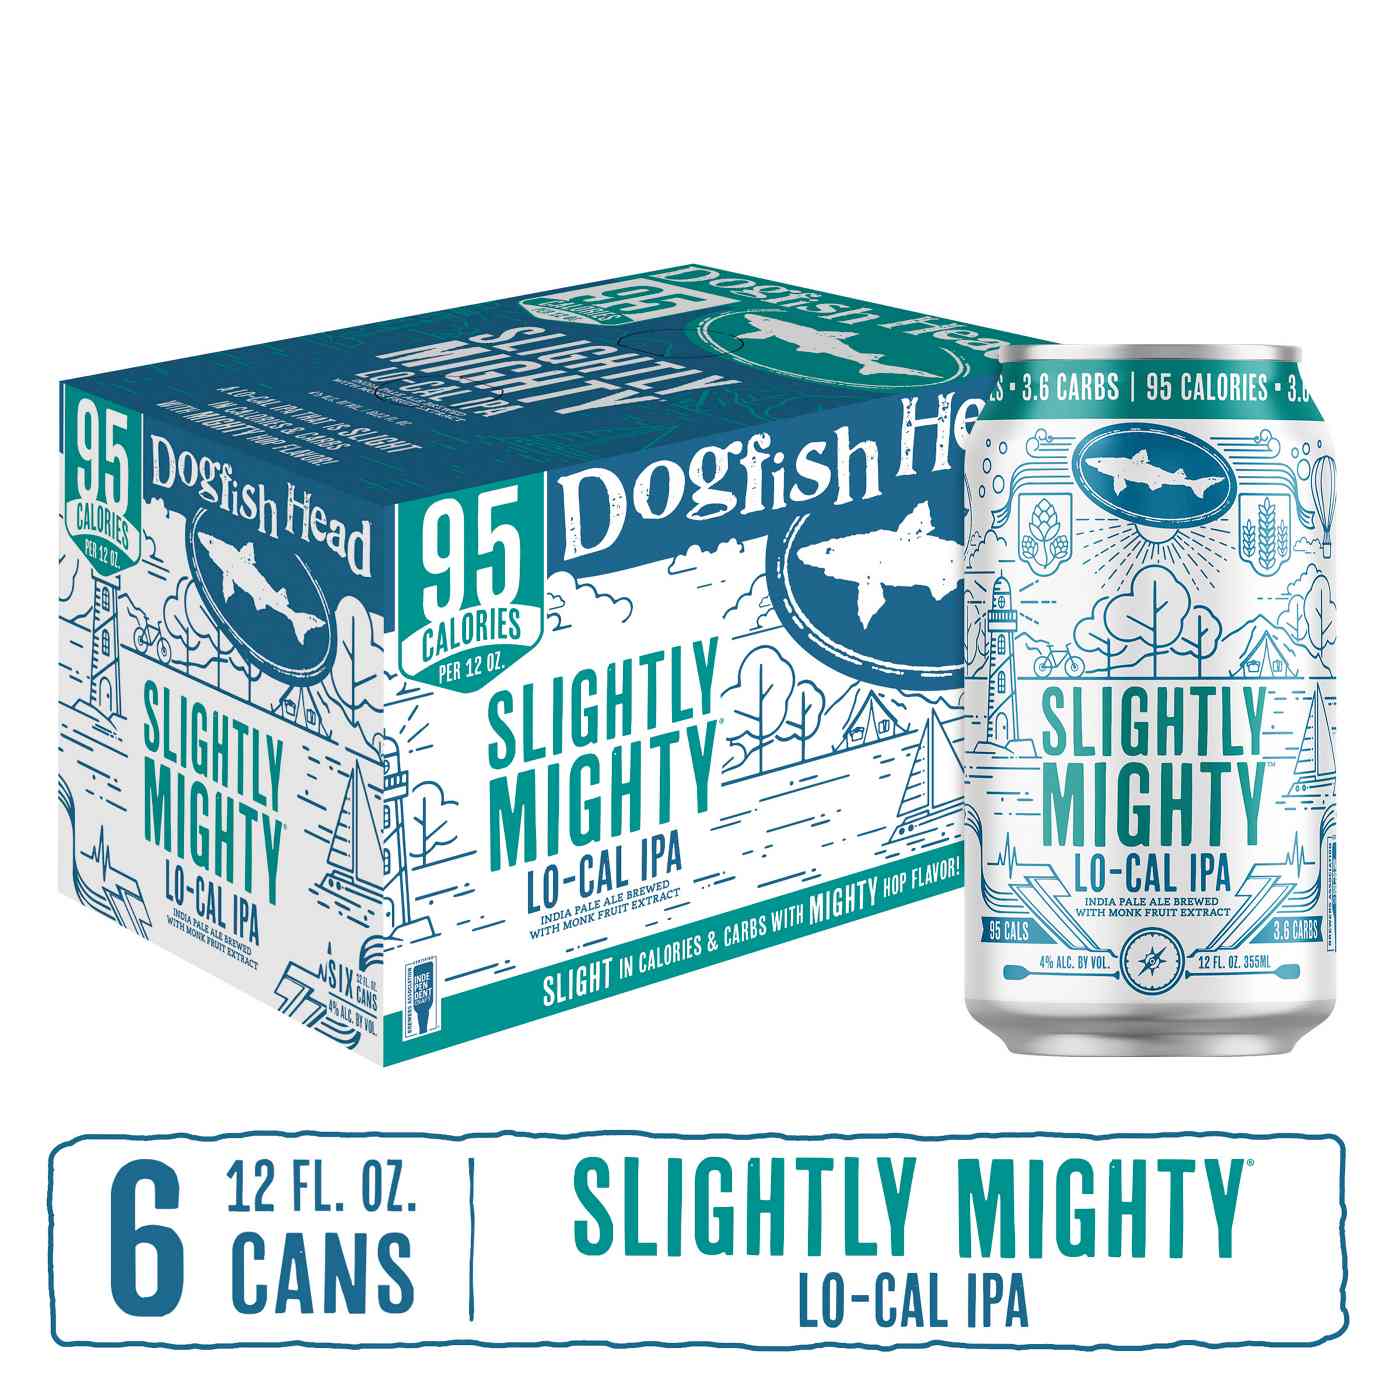 Dogfish Head Slightly Mighty Lo-Cal IPA Beer 12 oz Cans; image 3 of 3